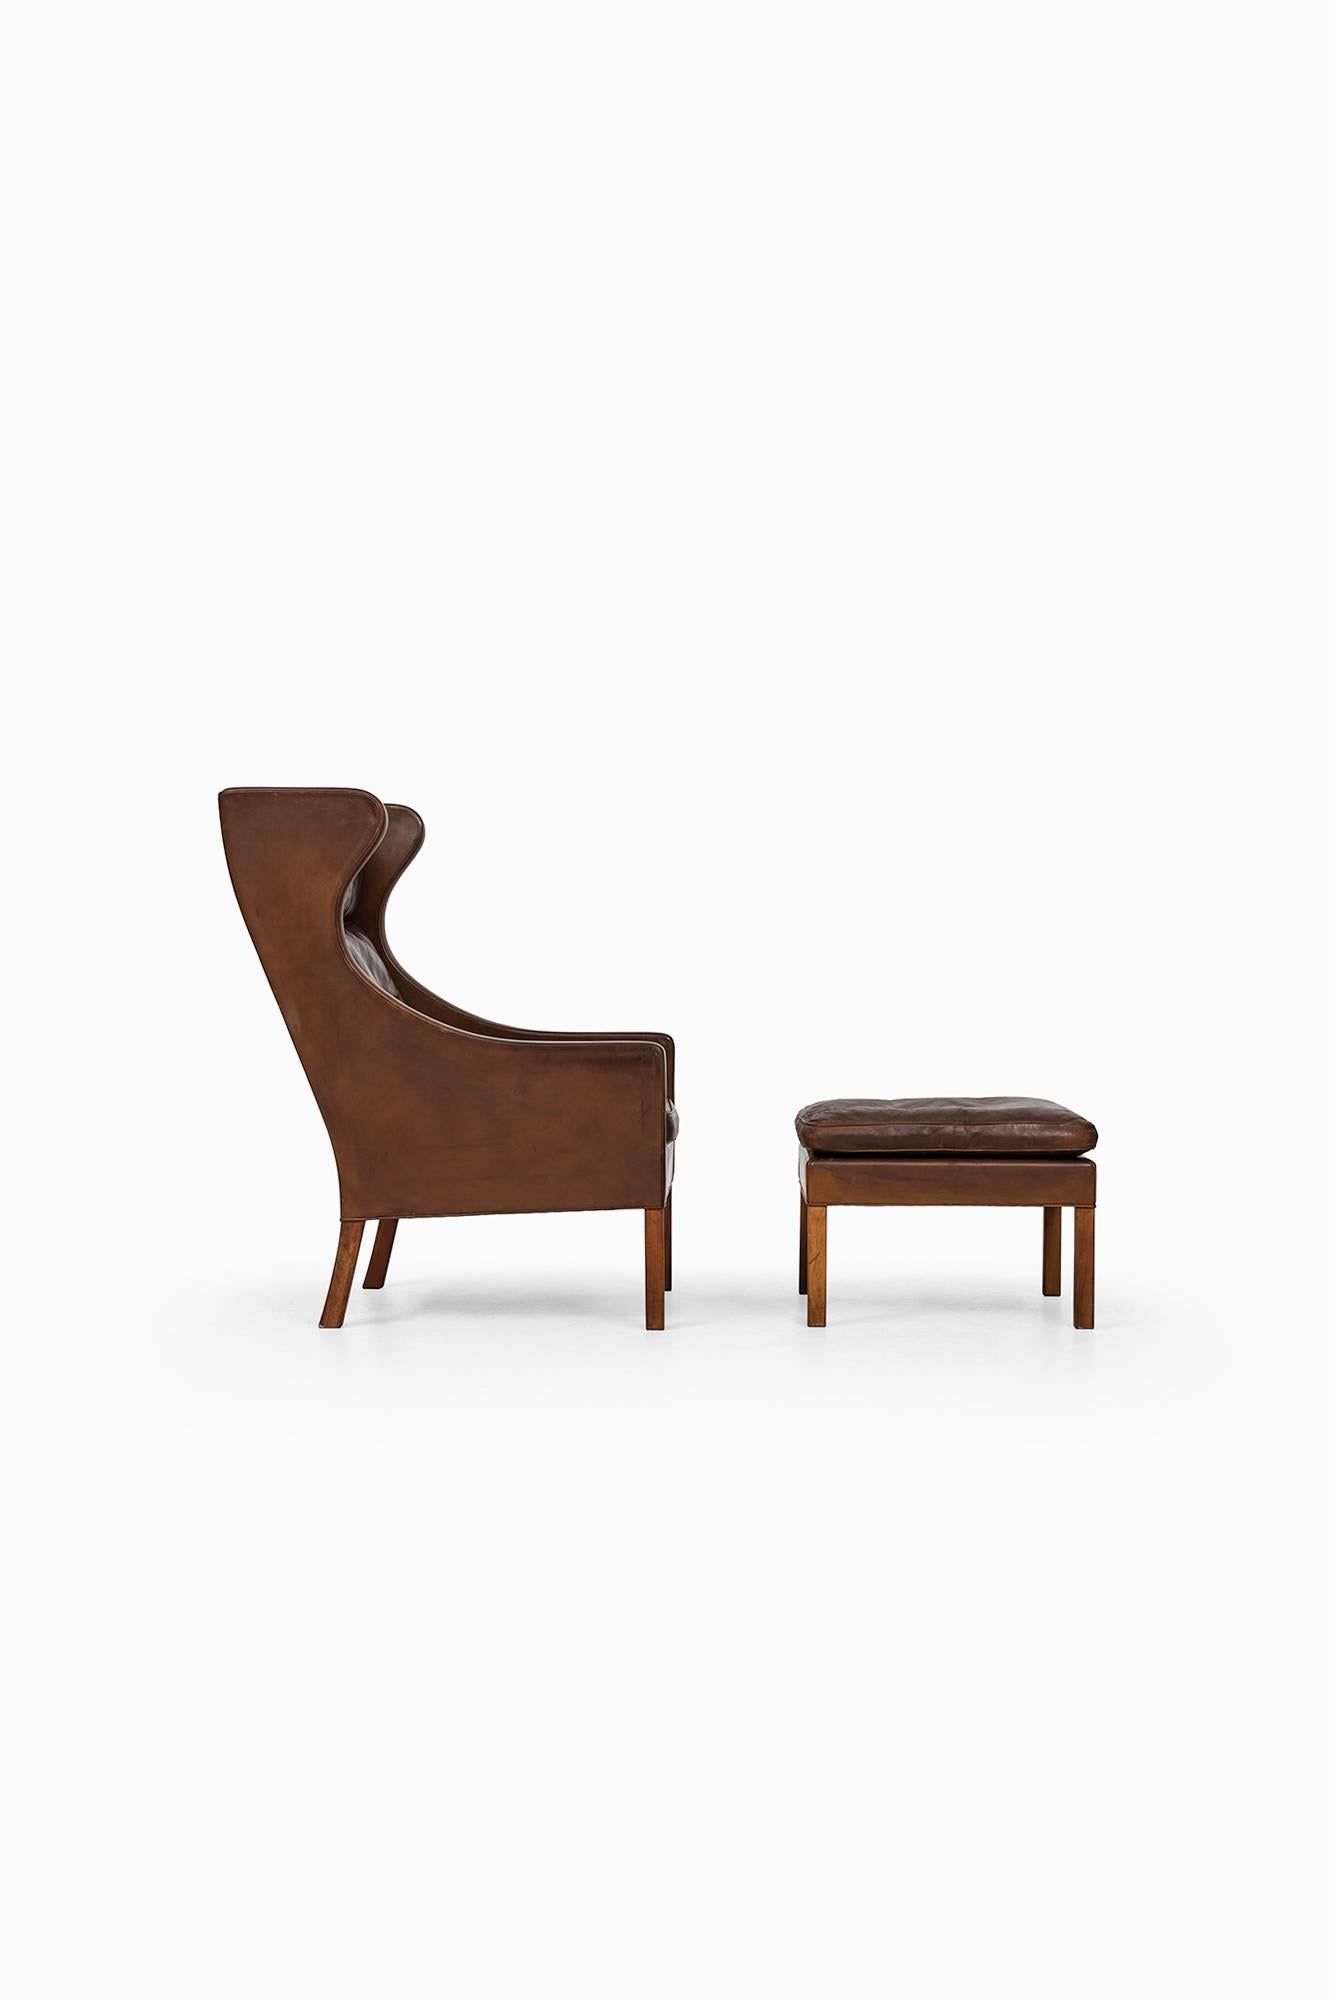 Rare wingback easy chair model 2204 and stool model 2202 designed by Børge Mogensen. Produced by Fredericia Stolefabrik in Denmark.